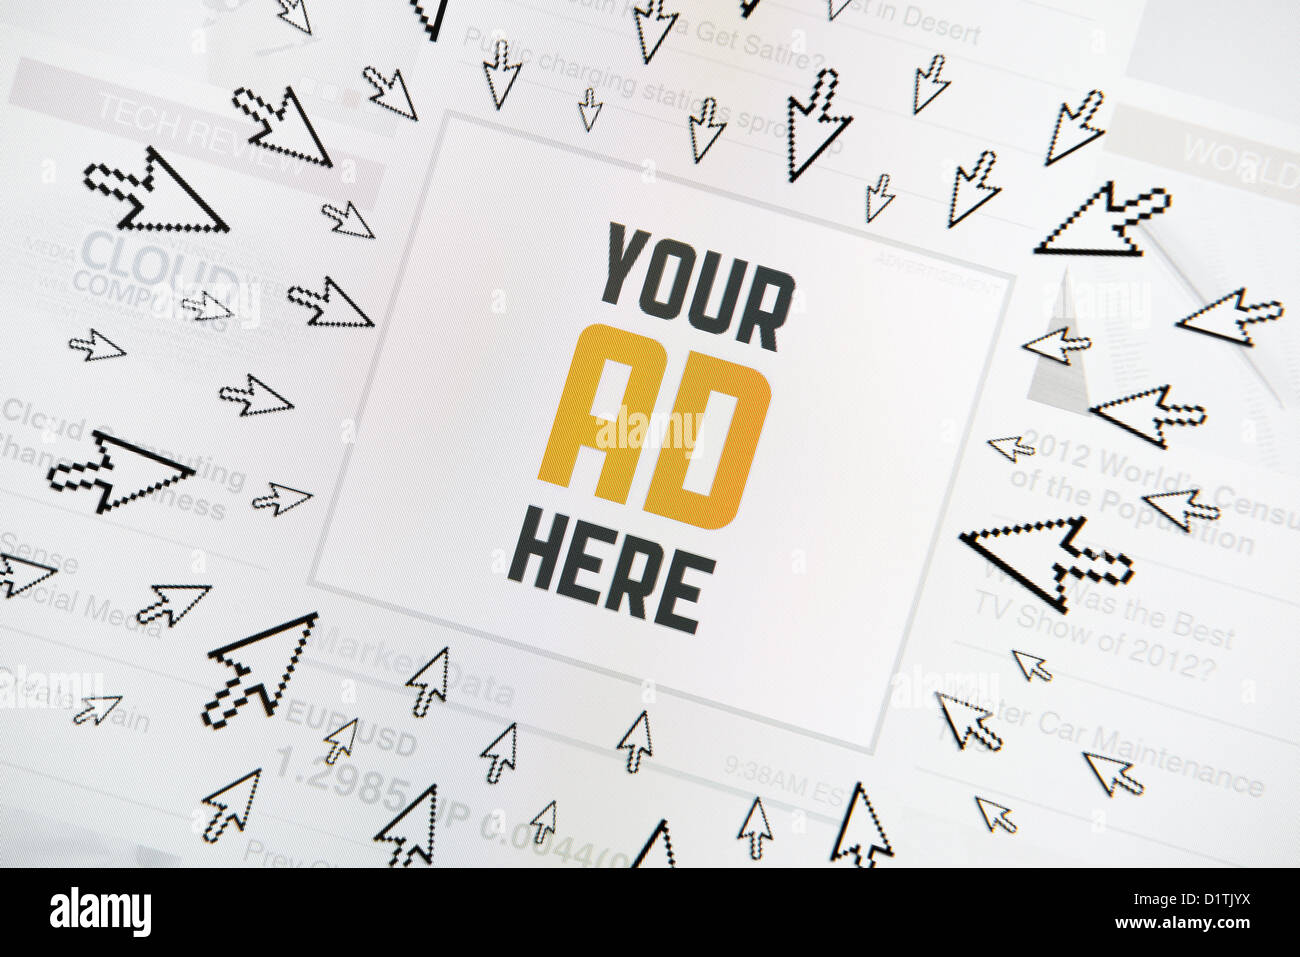 Success internet banner with text 'YOUR AD HERE' and lot of clicking pointers around. Conceptual image. Stock Photo